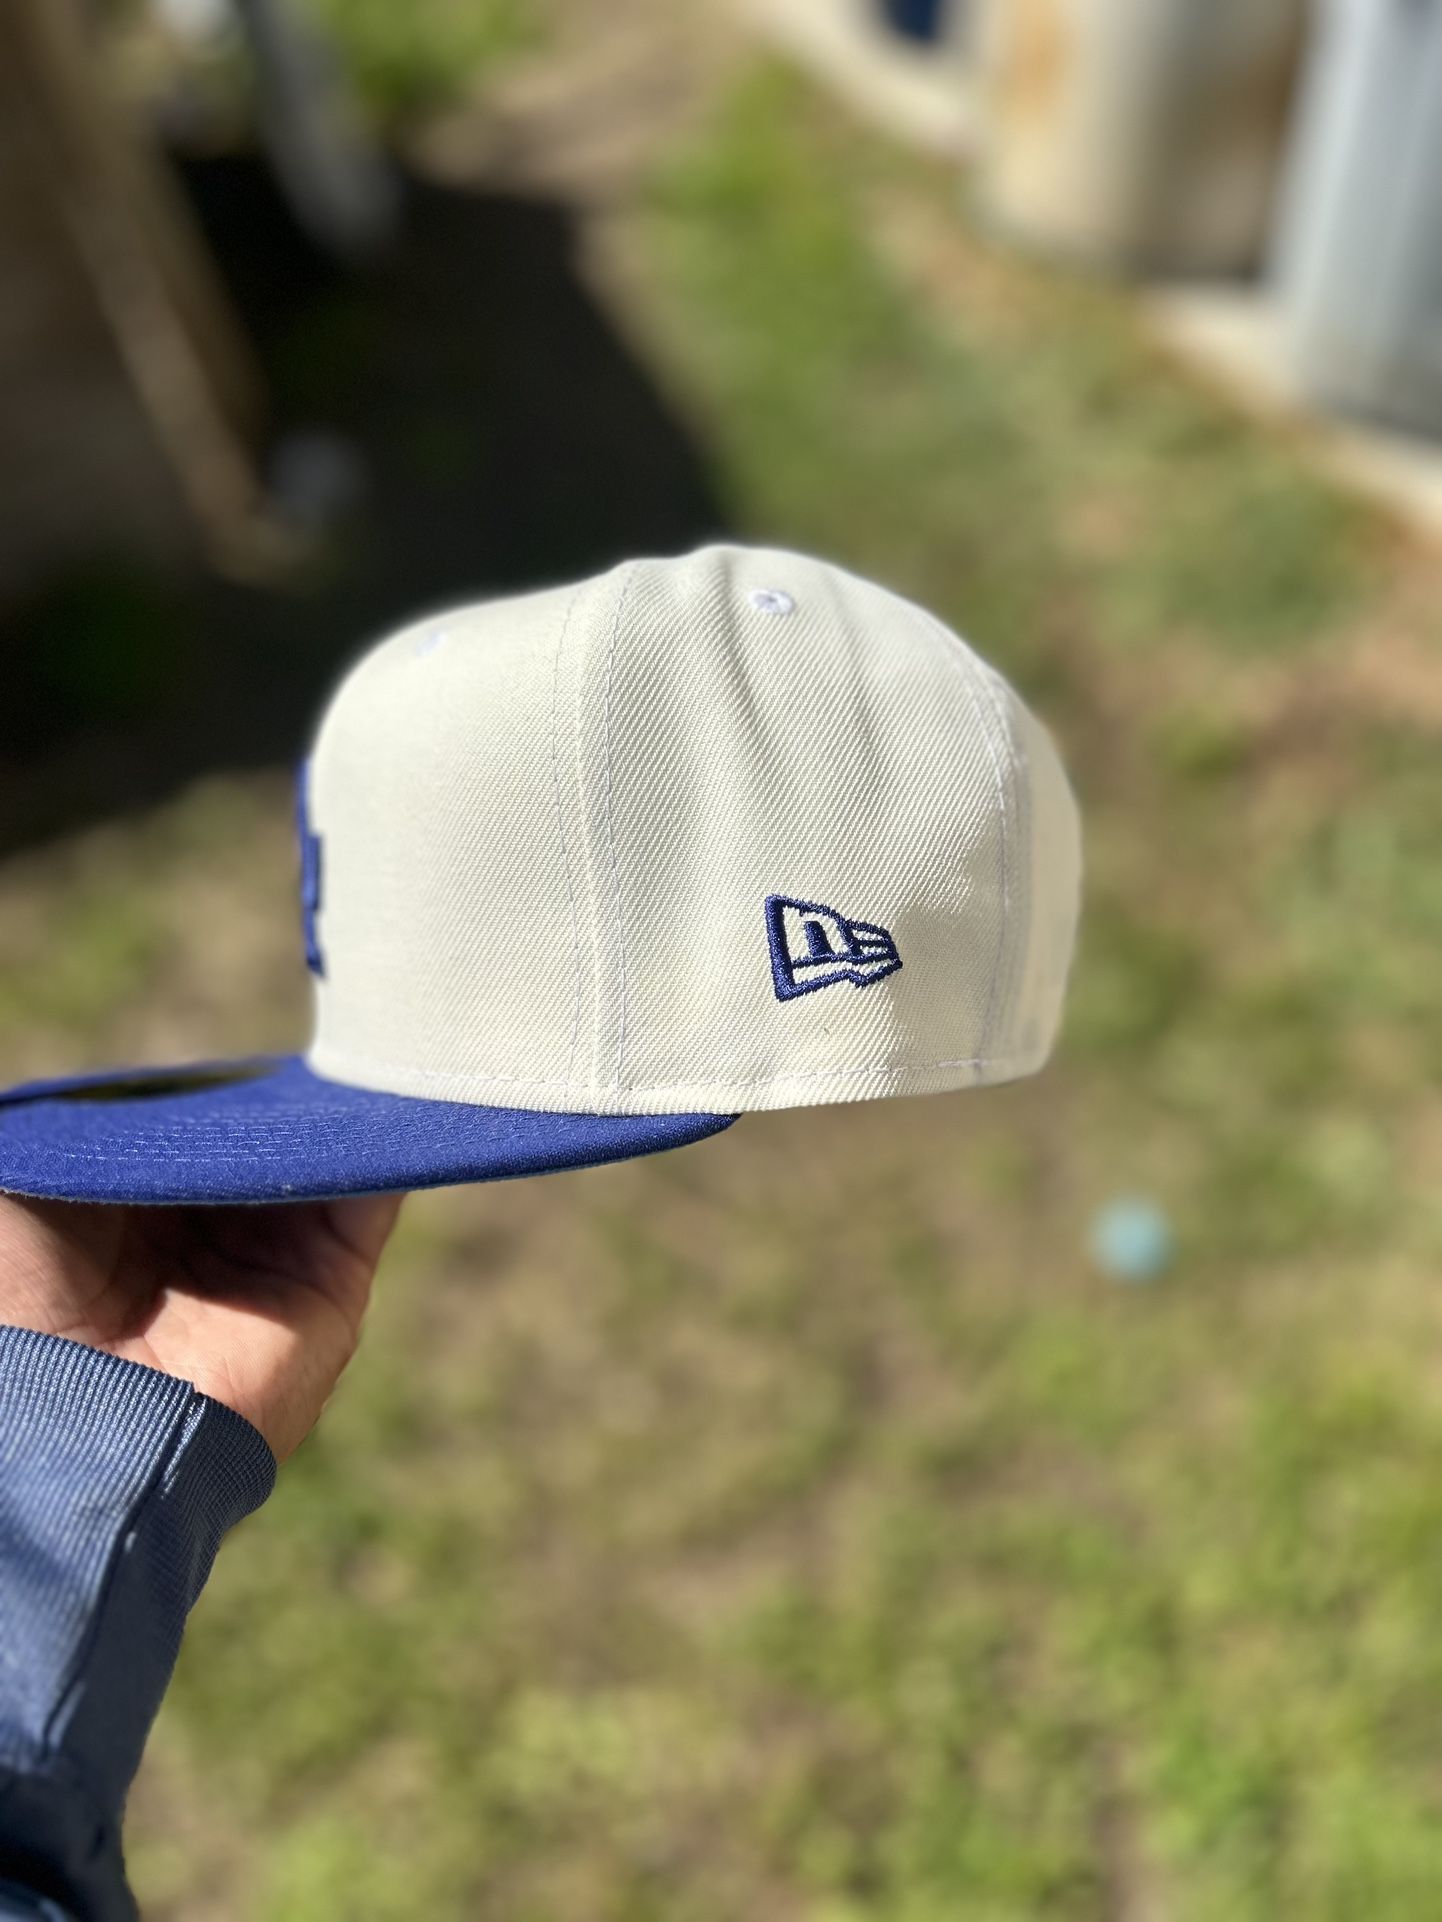 LA Dodgers size 7 fitted hat for Sale in Rosemead, CA - OfferUp